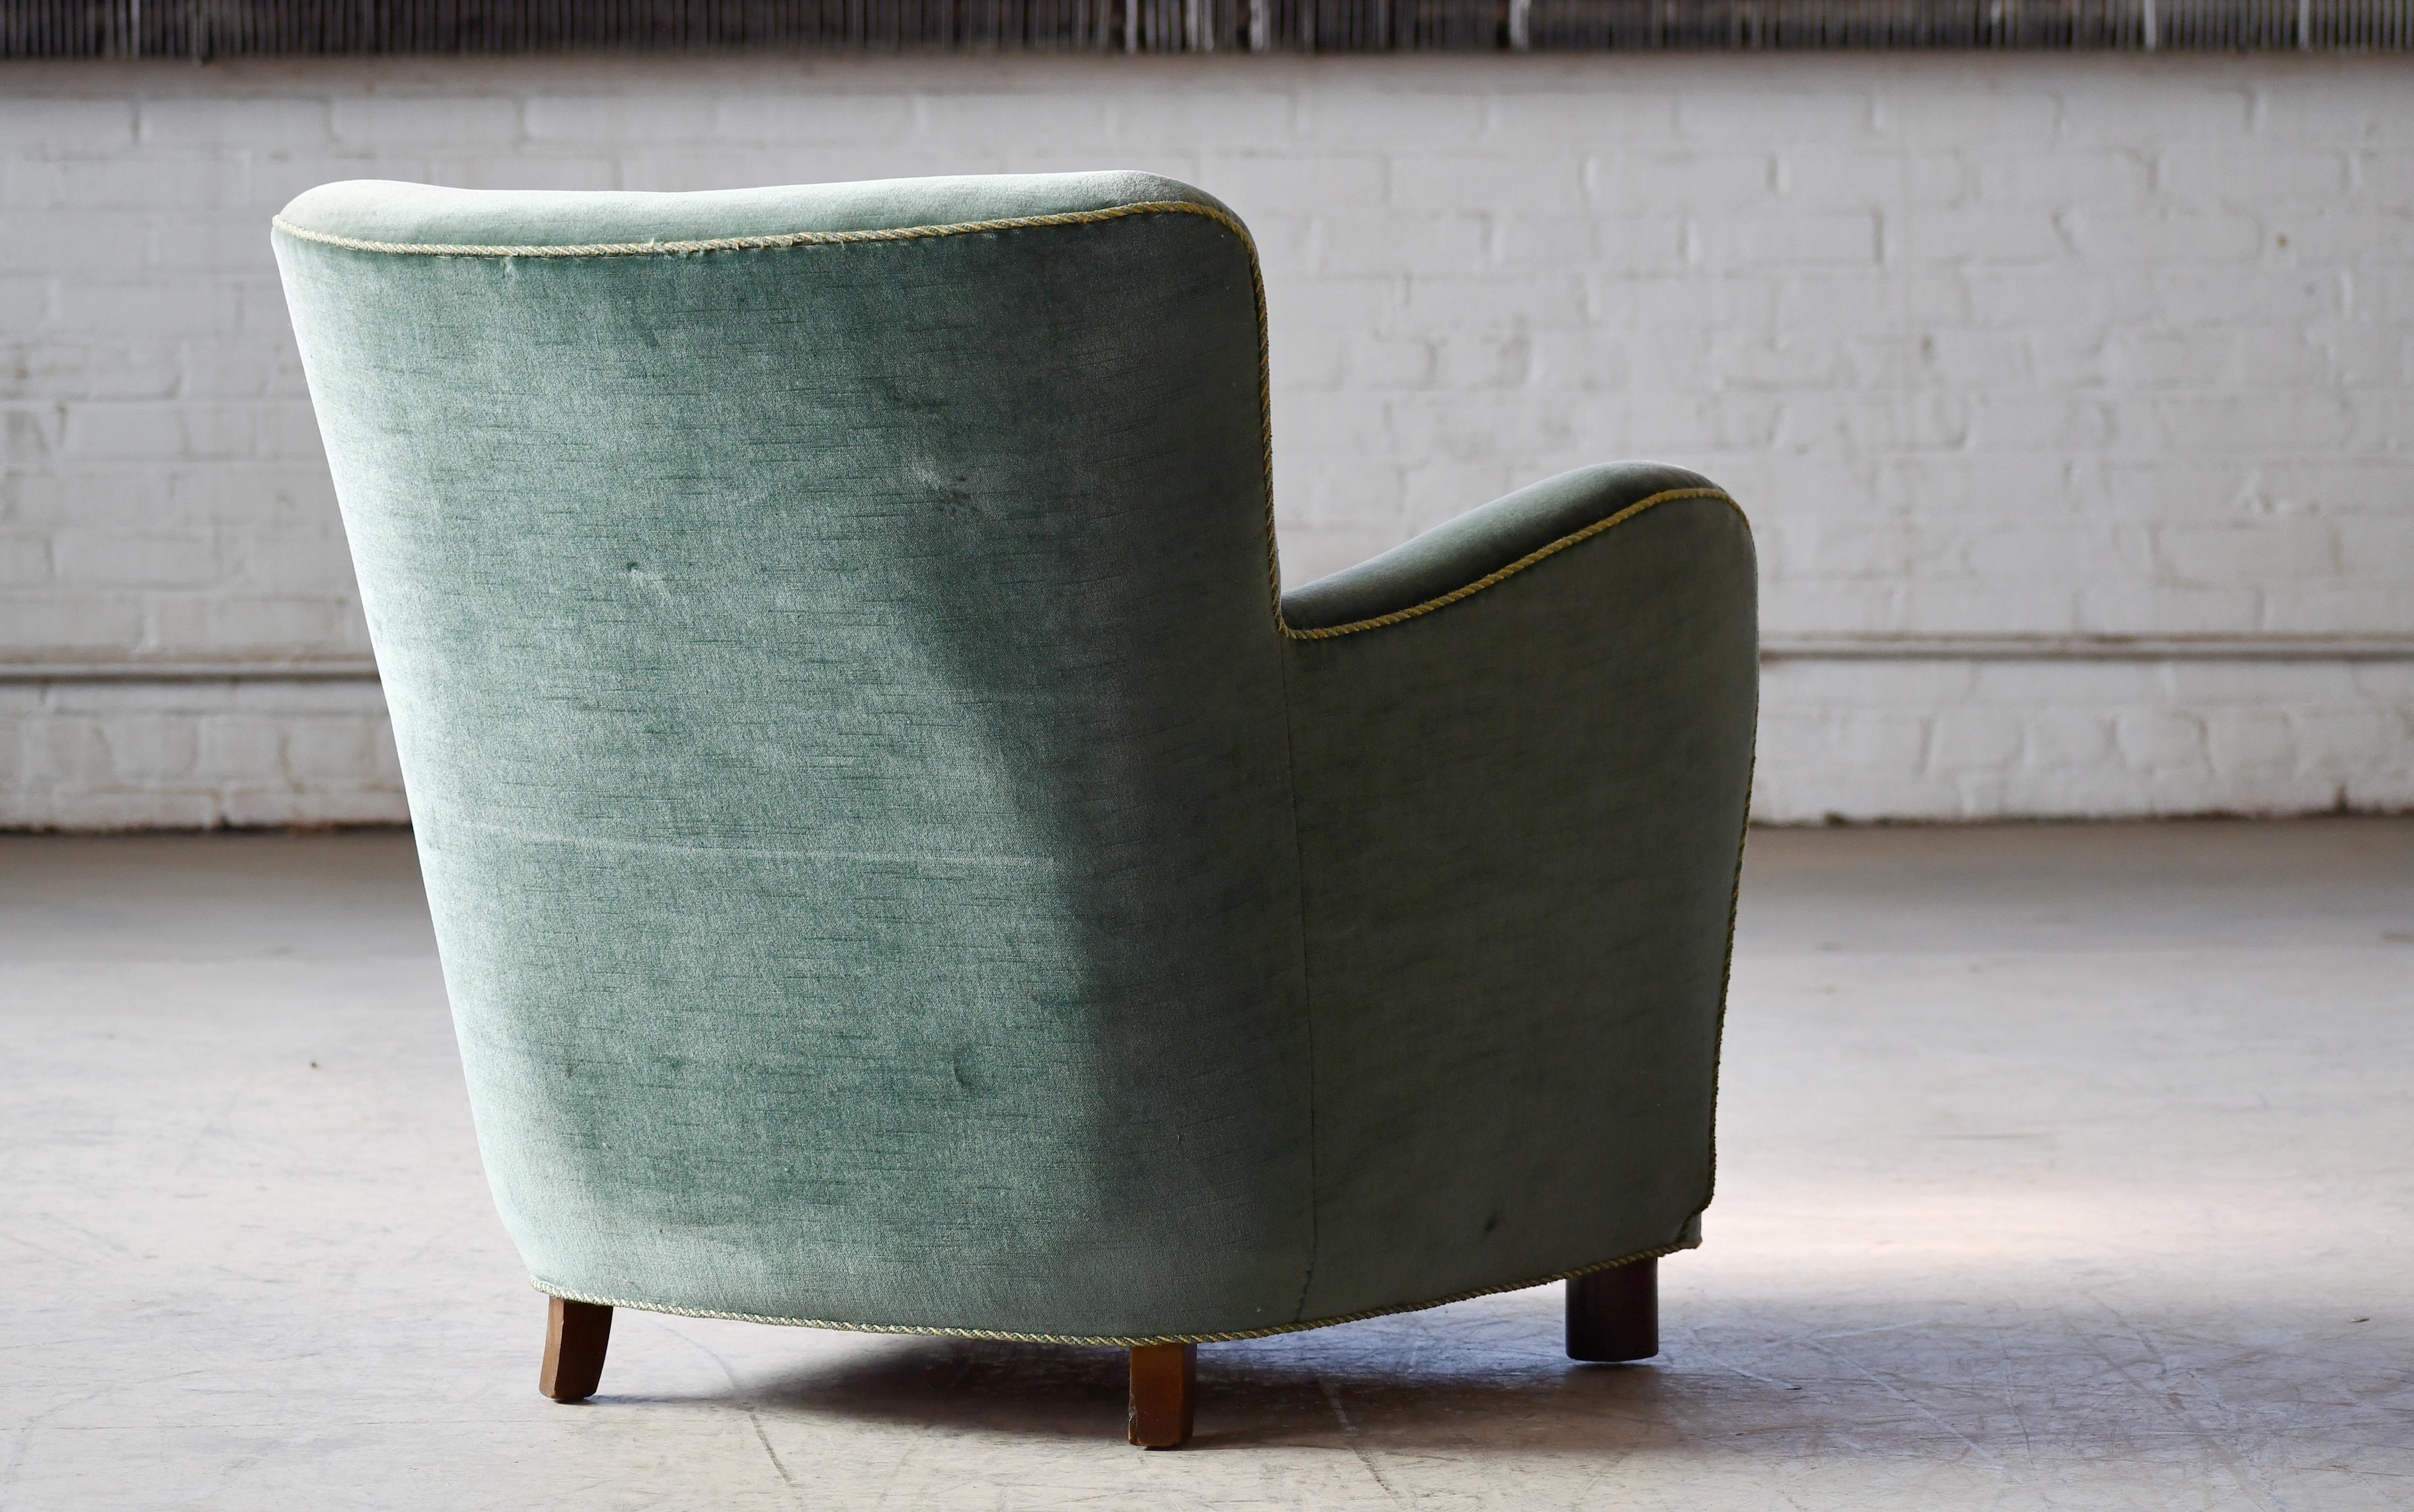 Danish Art Deco or Early Midcentury Lounge Chair in Green Mohair 1930-40s 3